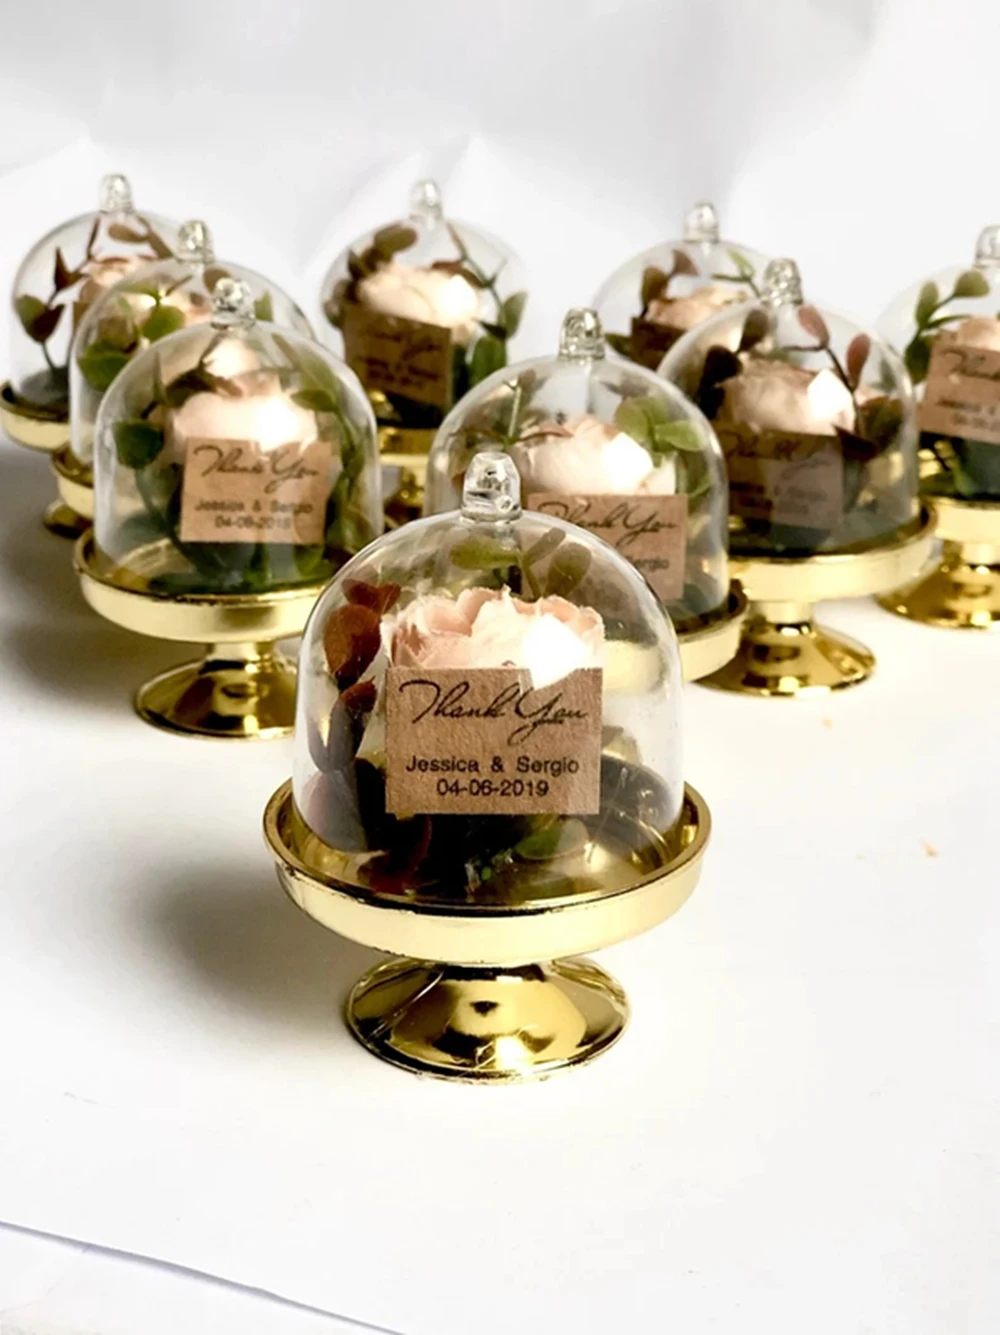 

10 pcs Custom Wedding Favors, Wedding Favors for Guests, Beauty and the Beast Party Favors, Rustic Favors, Personalized Baptism